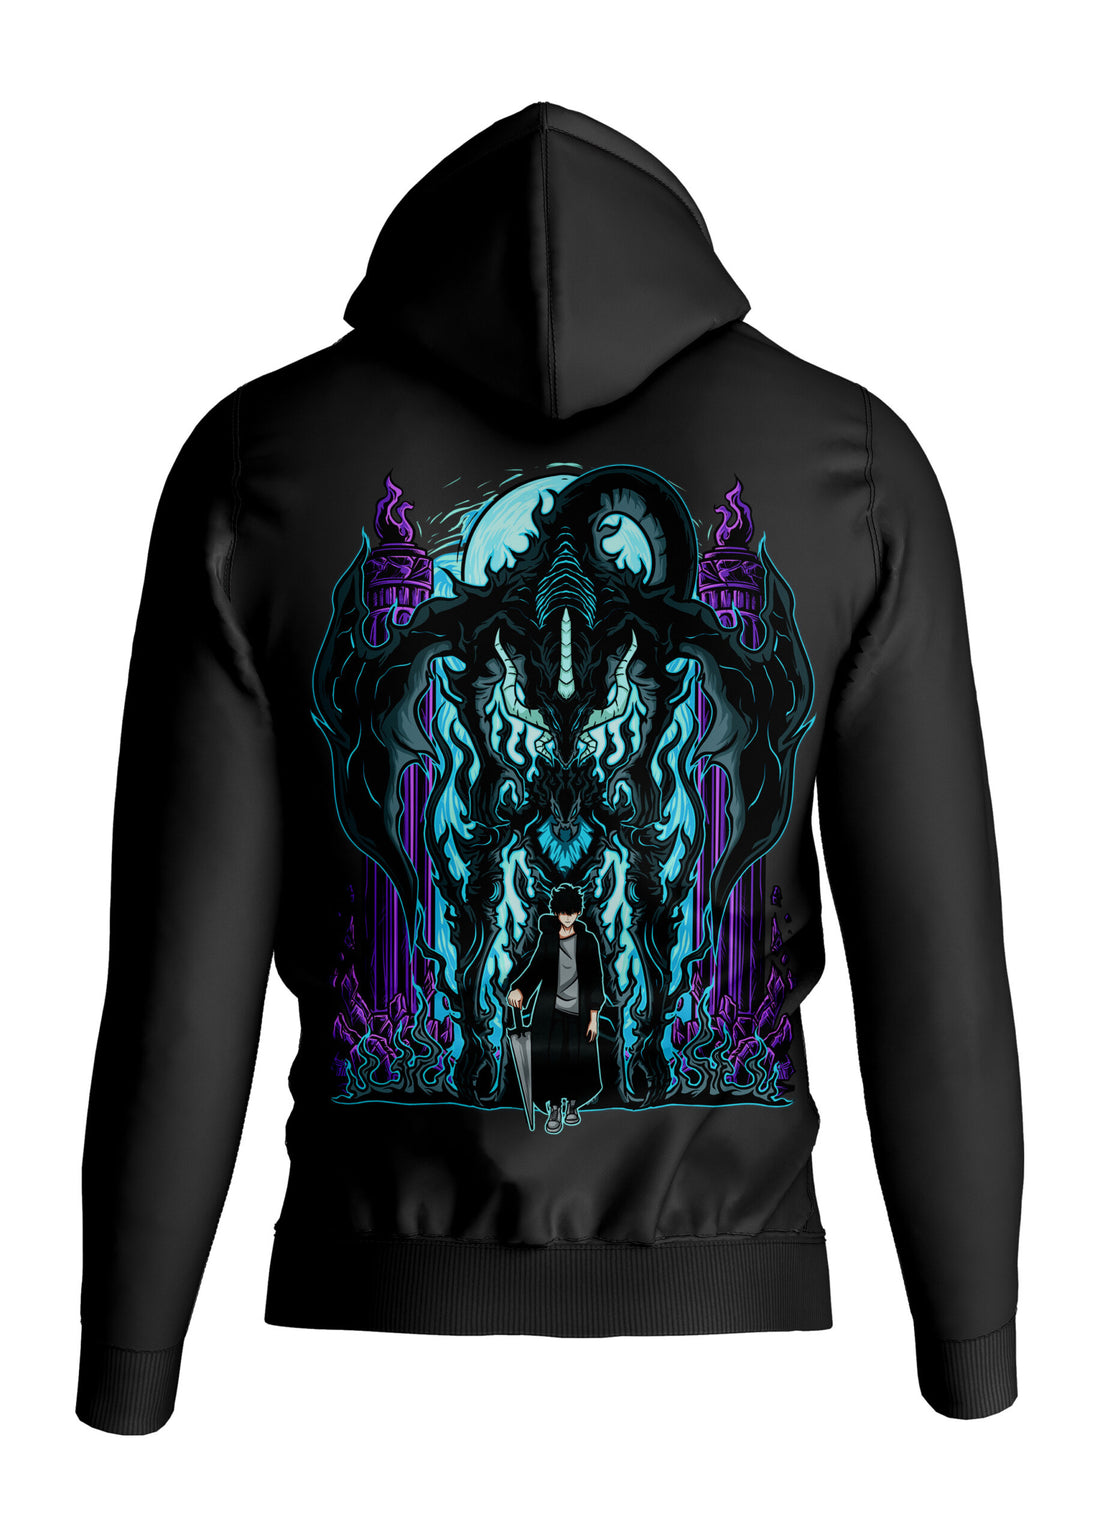 Solo Leveling Level Up Hoodie